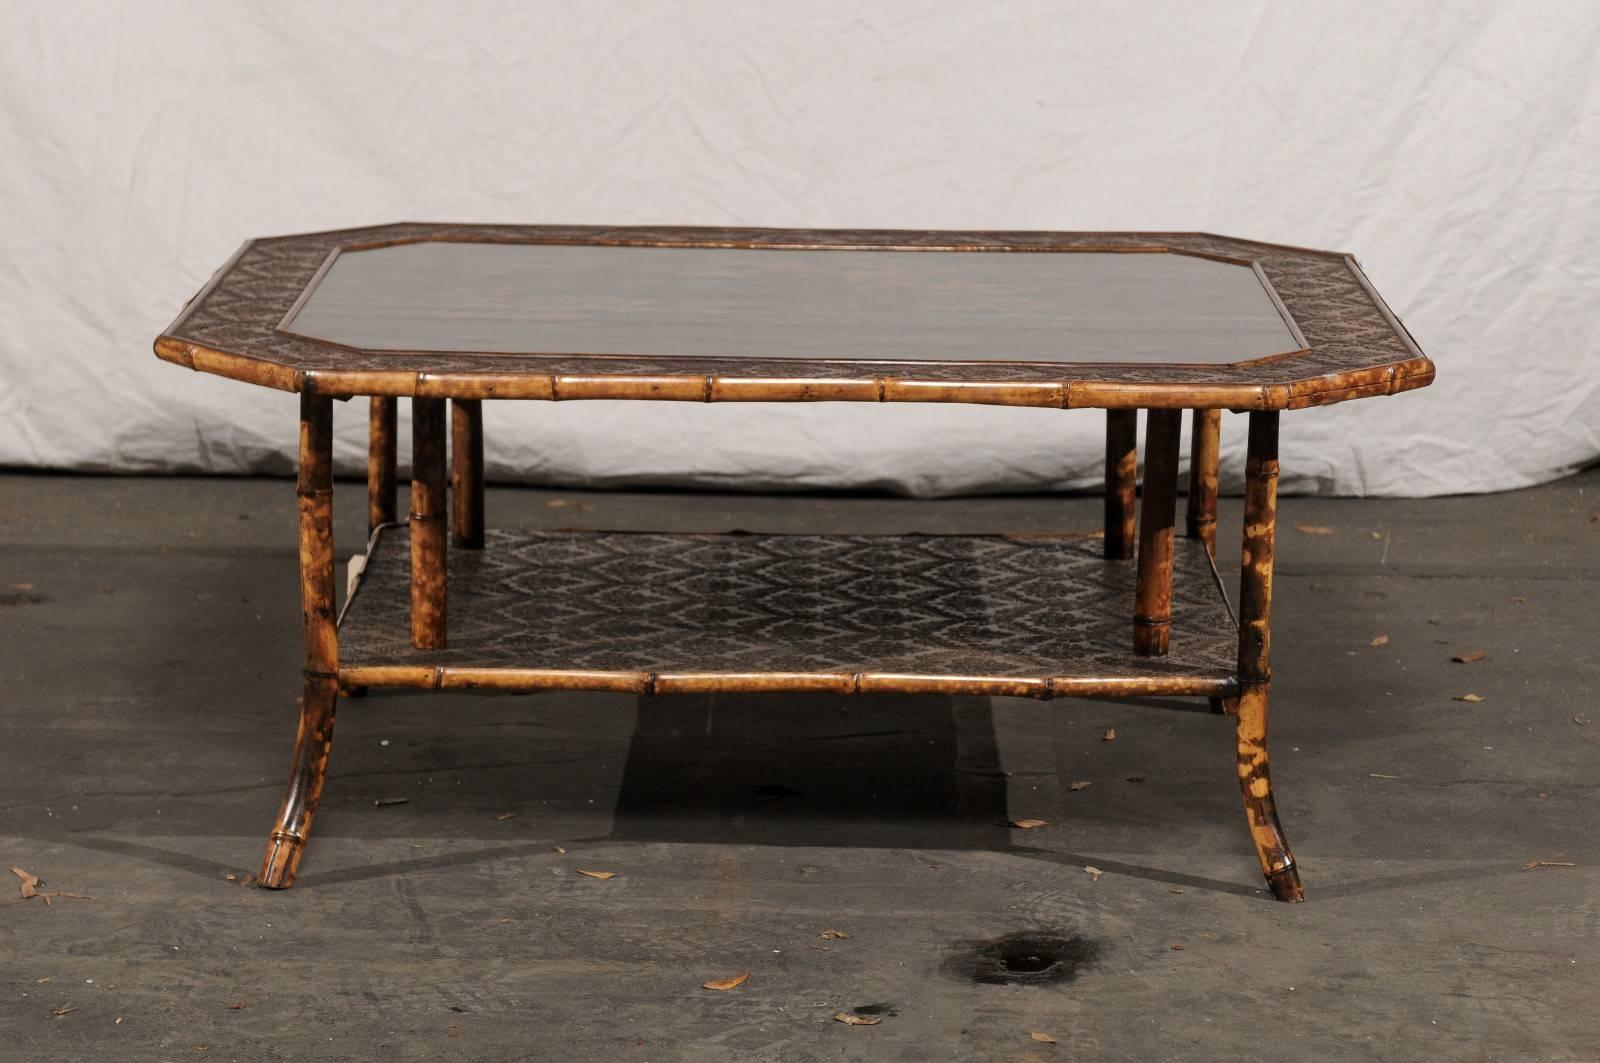 20th century two-tier coffee table, circa 1900.